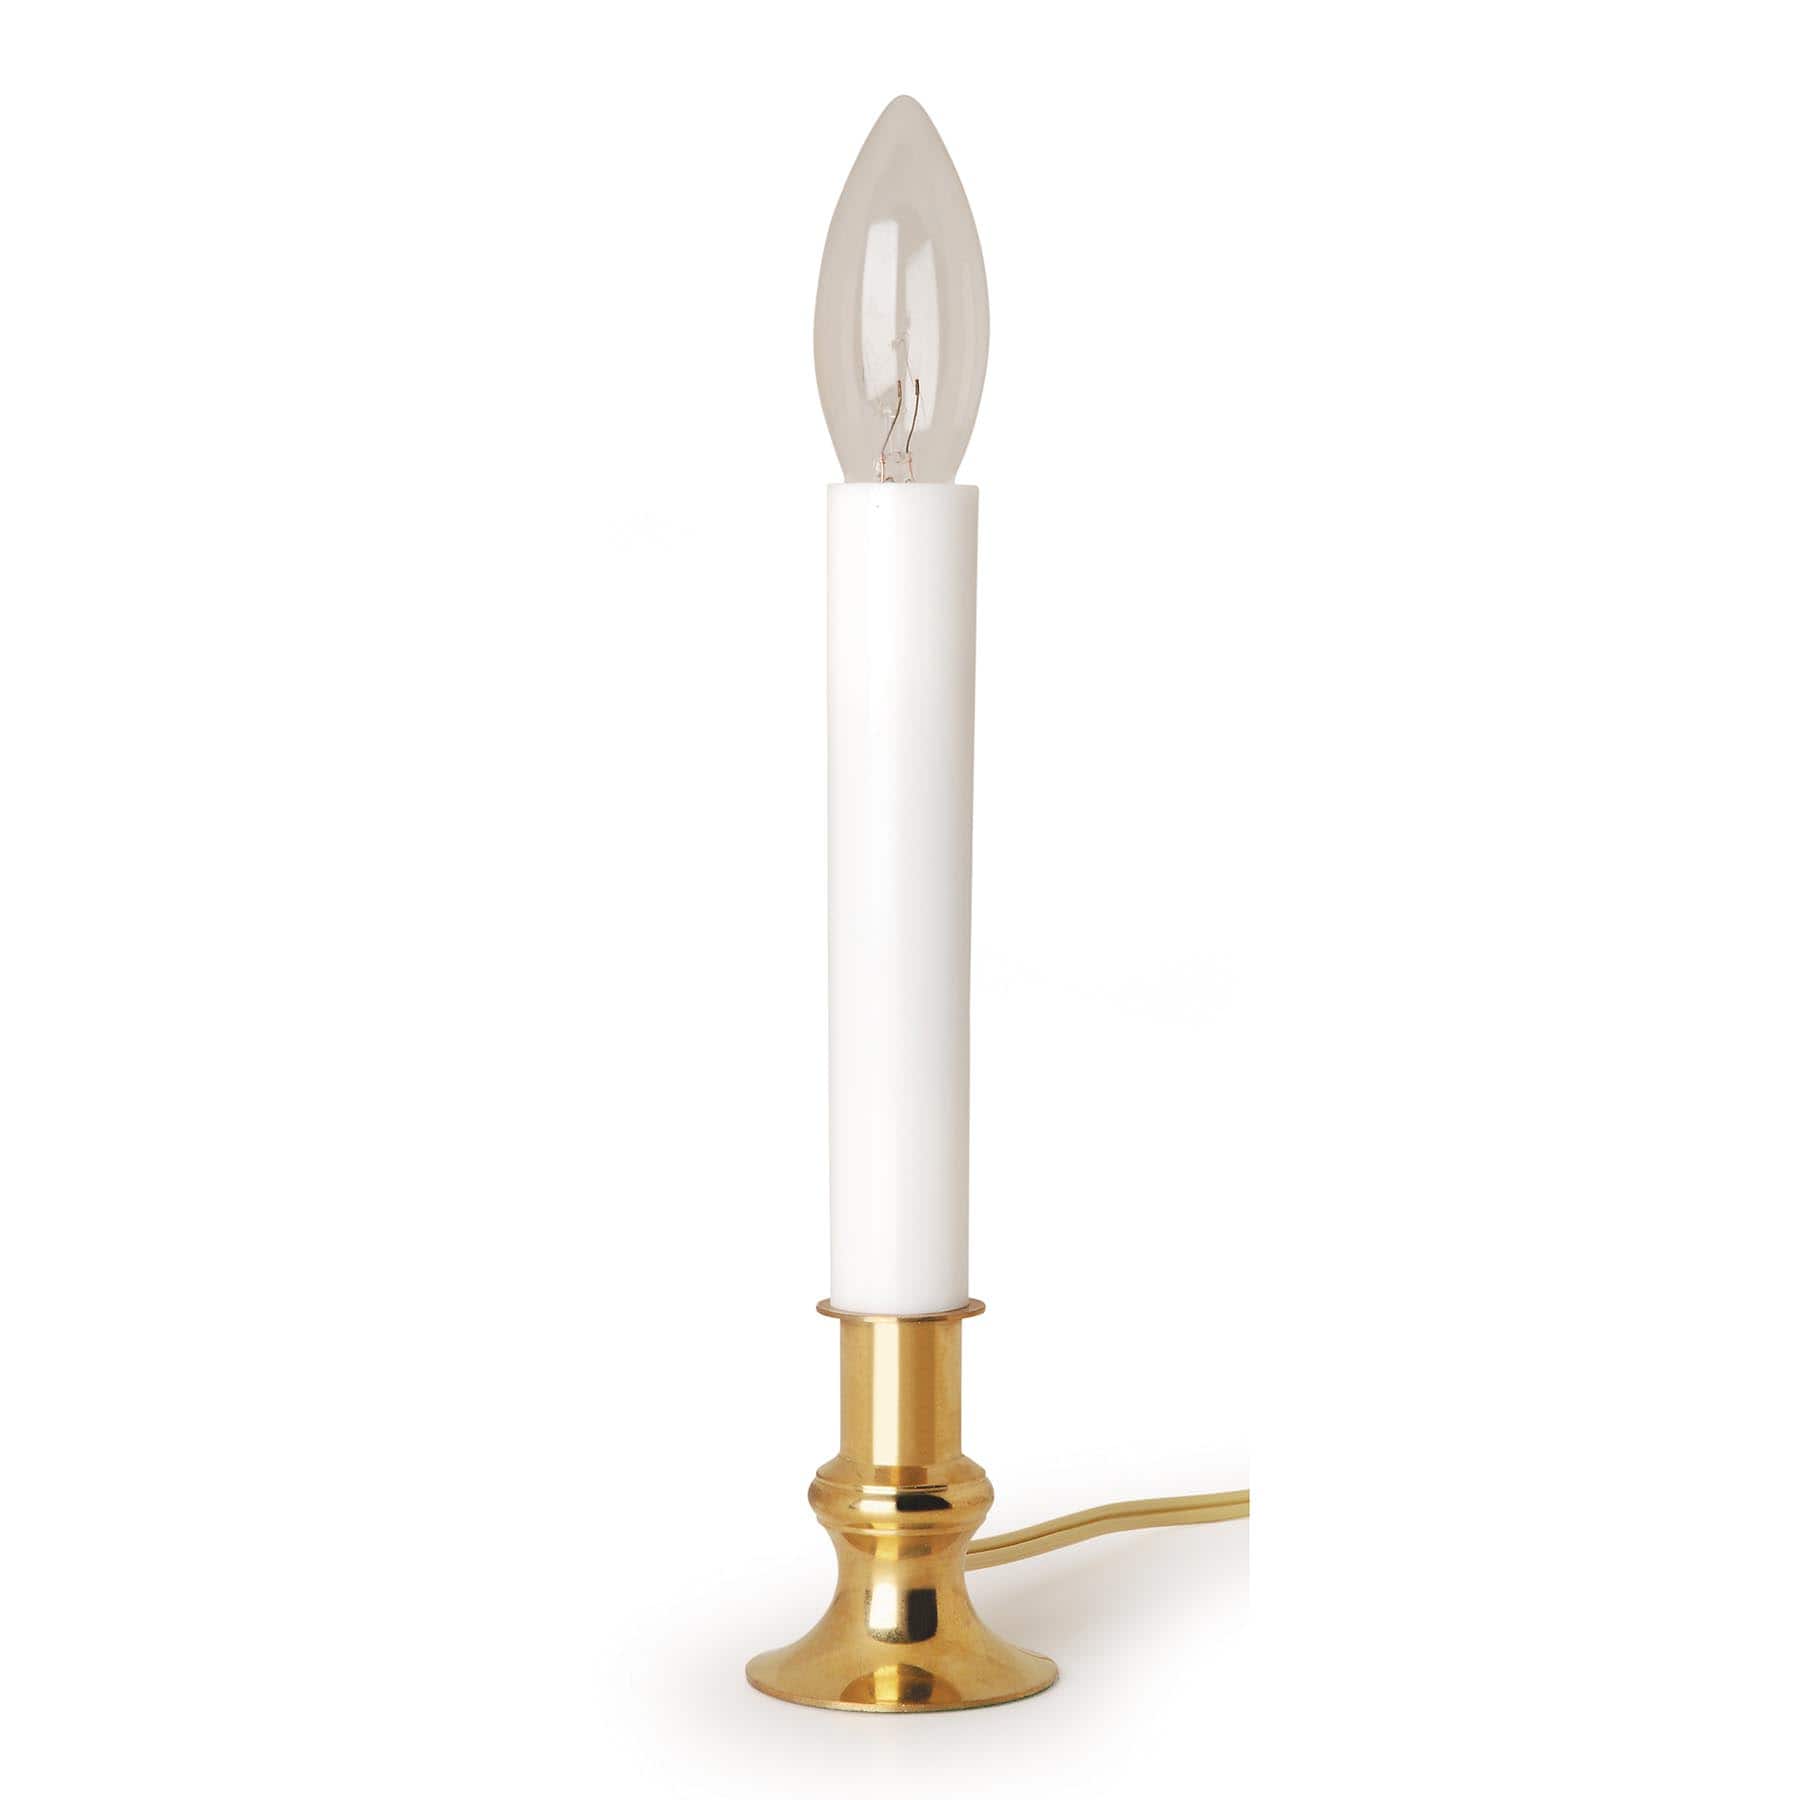 Electric Candle Sleeve Base – Brown & Hopkins Country Store